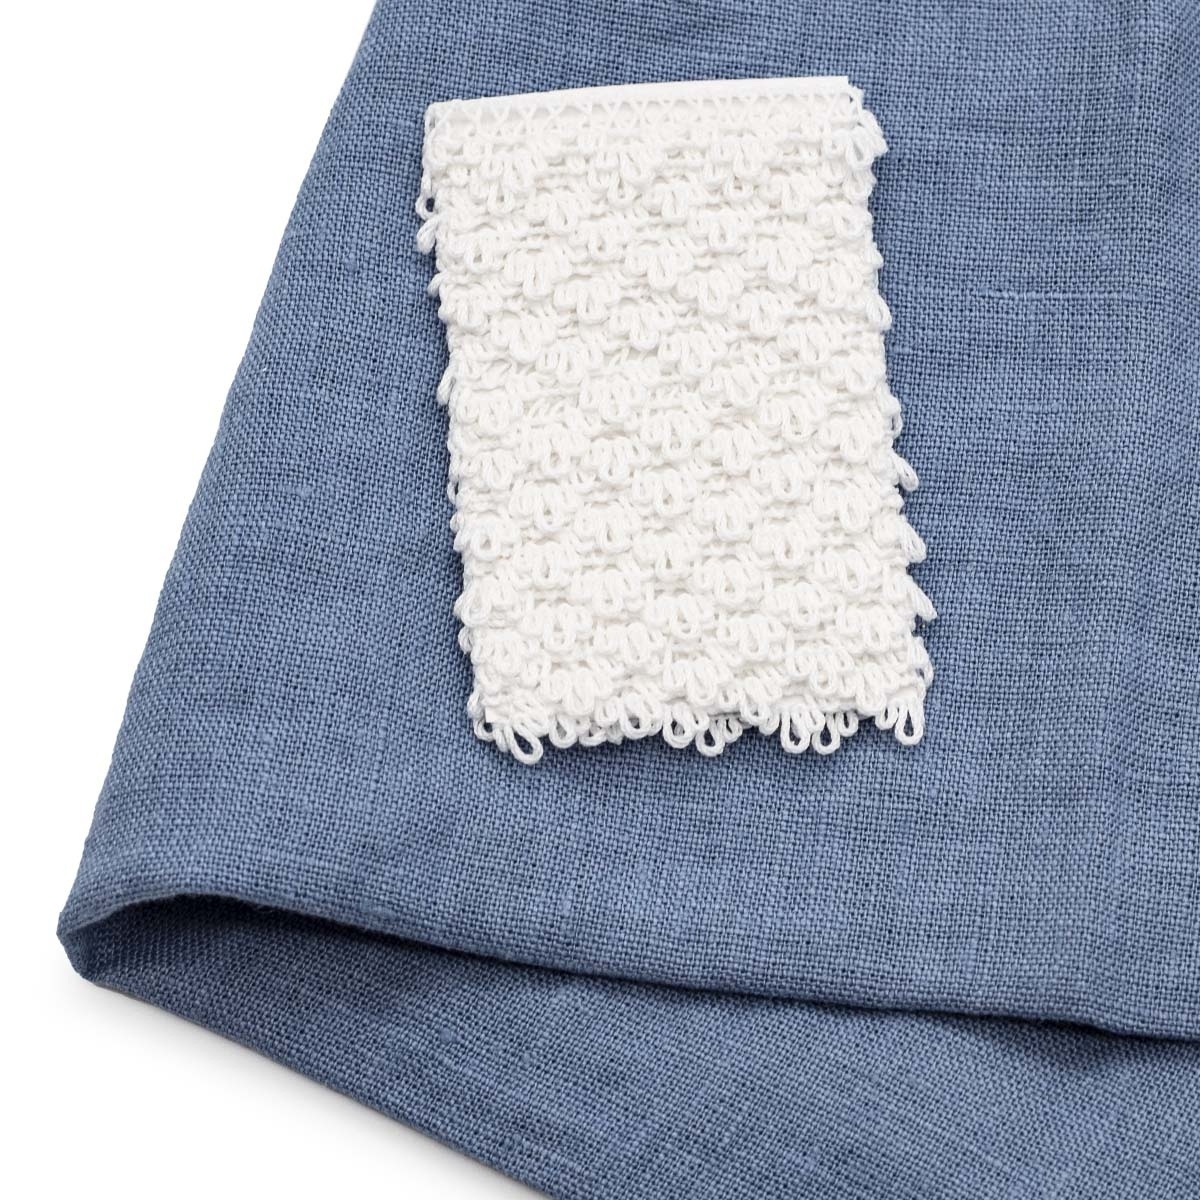 Gray-blue&White Linen with Braid Patchwork Fabric фото 1